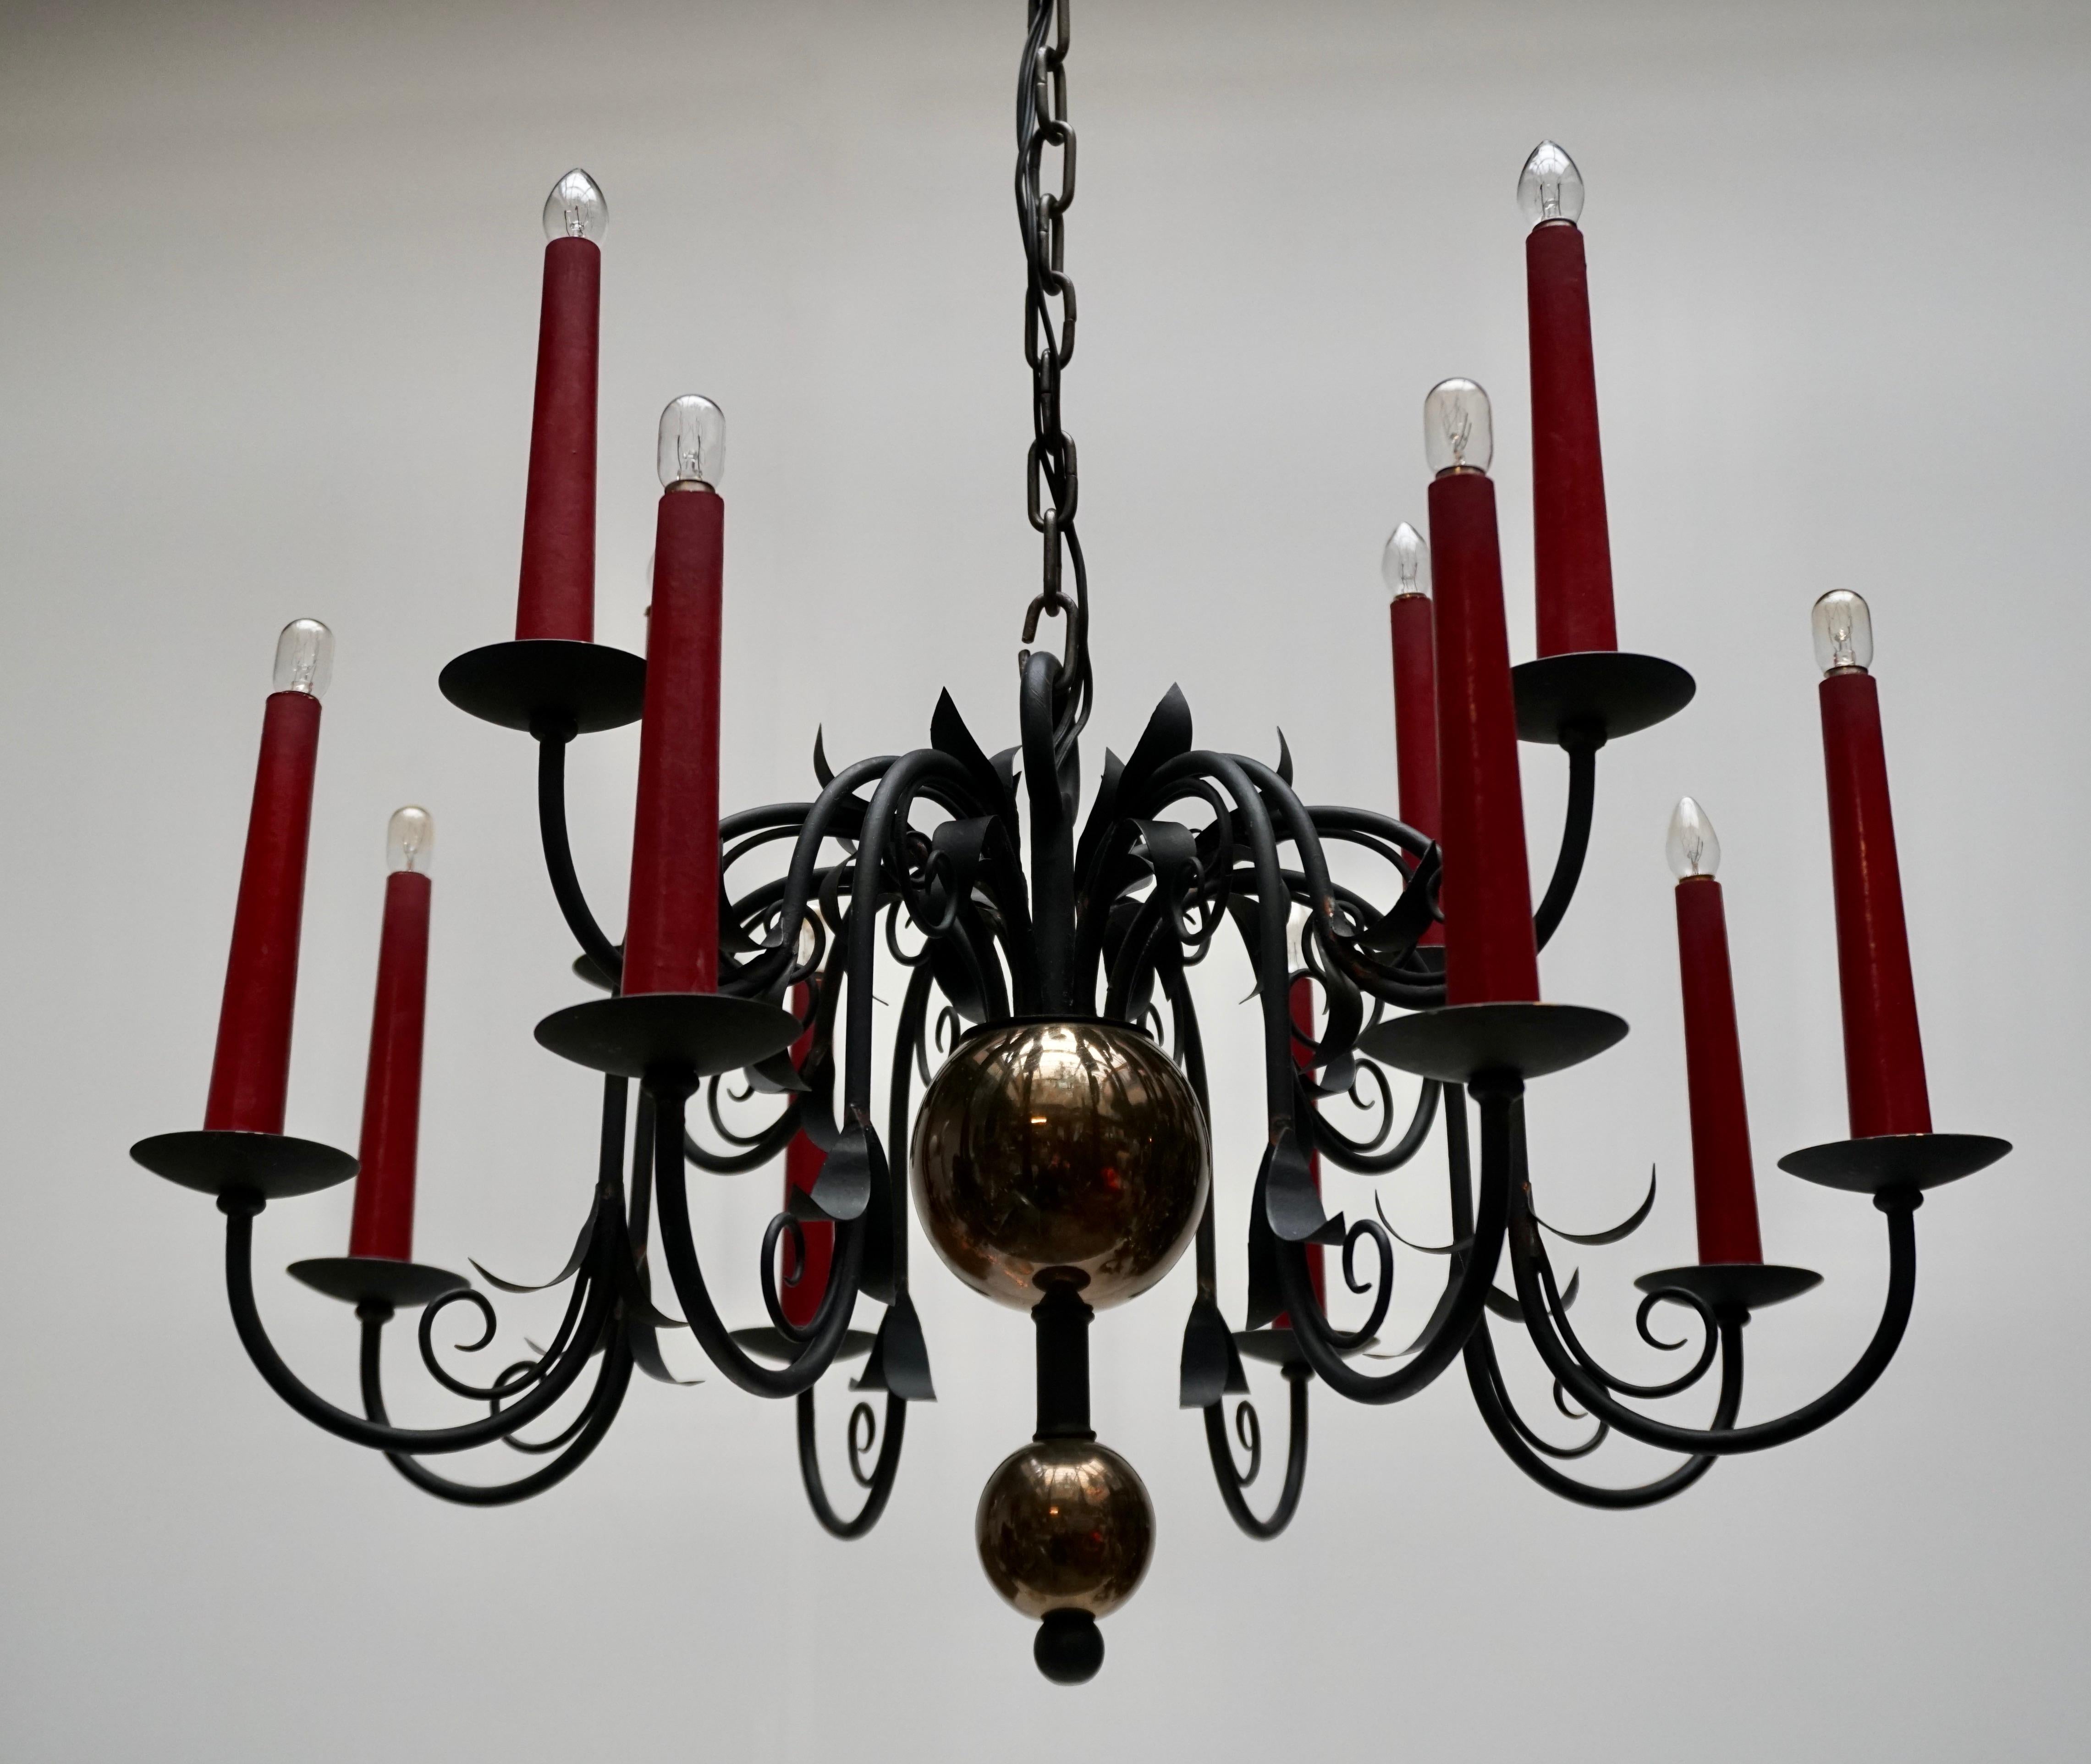 1950s Black Wrought Iron Gothic Chandelier with 12 Red Candlesticks 3